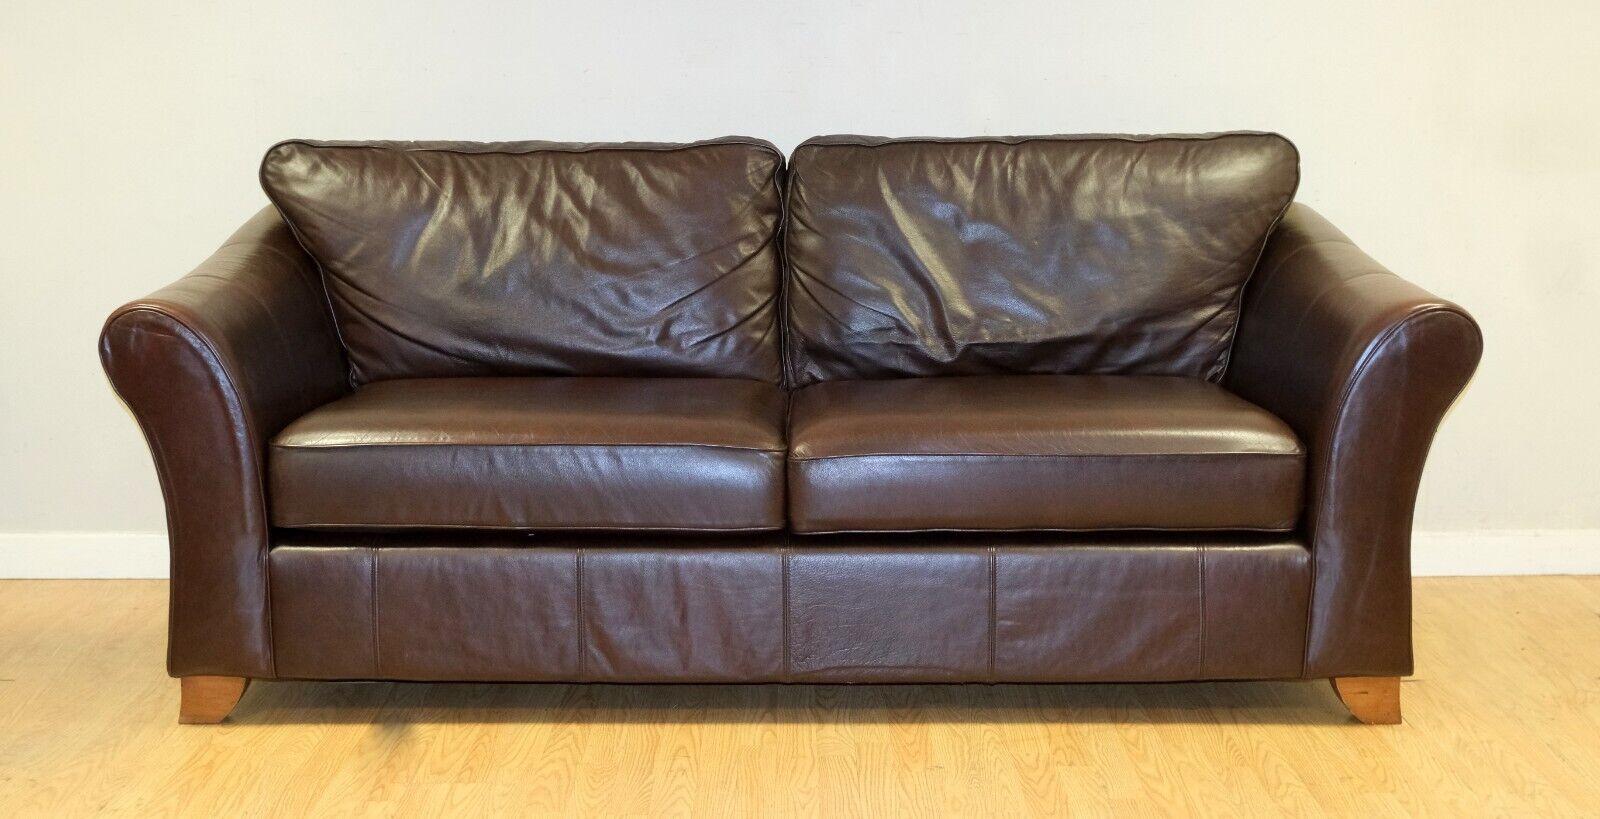 LOVELY MARKS & SPENCER ABBEY BRoWN LEATHER TWO SEATER SOFA ON WOODEN FEETs im Angebot 6